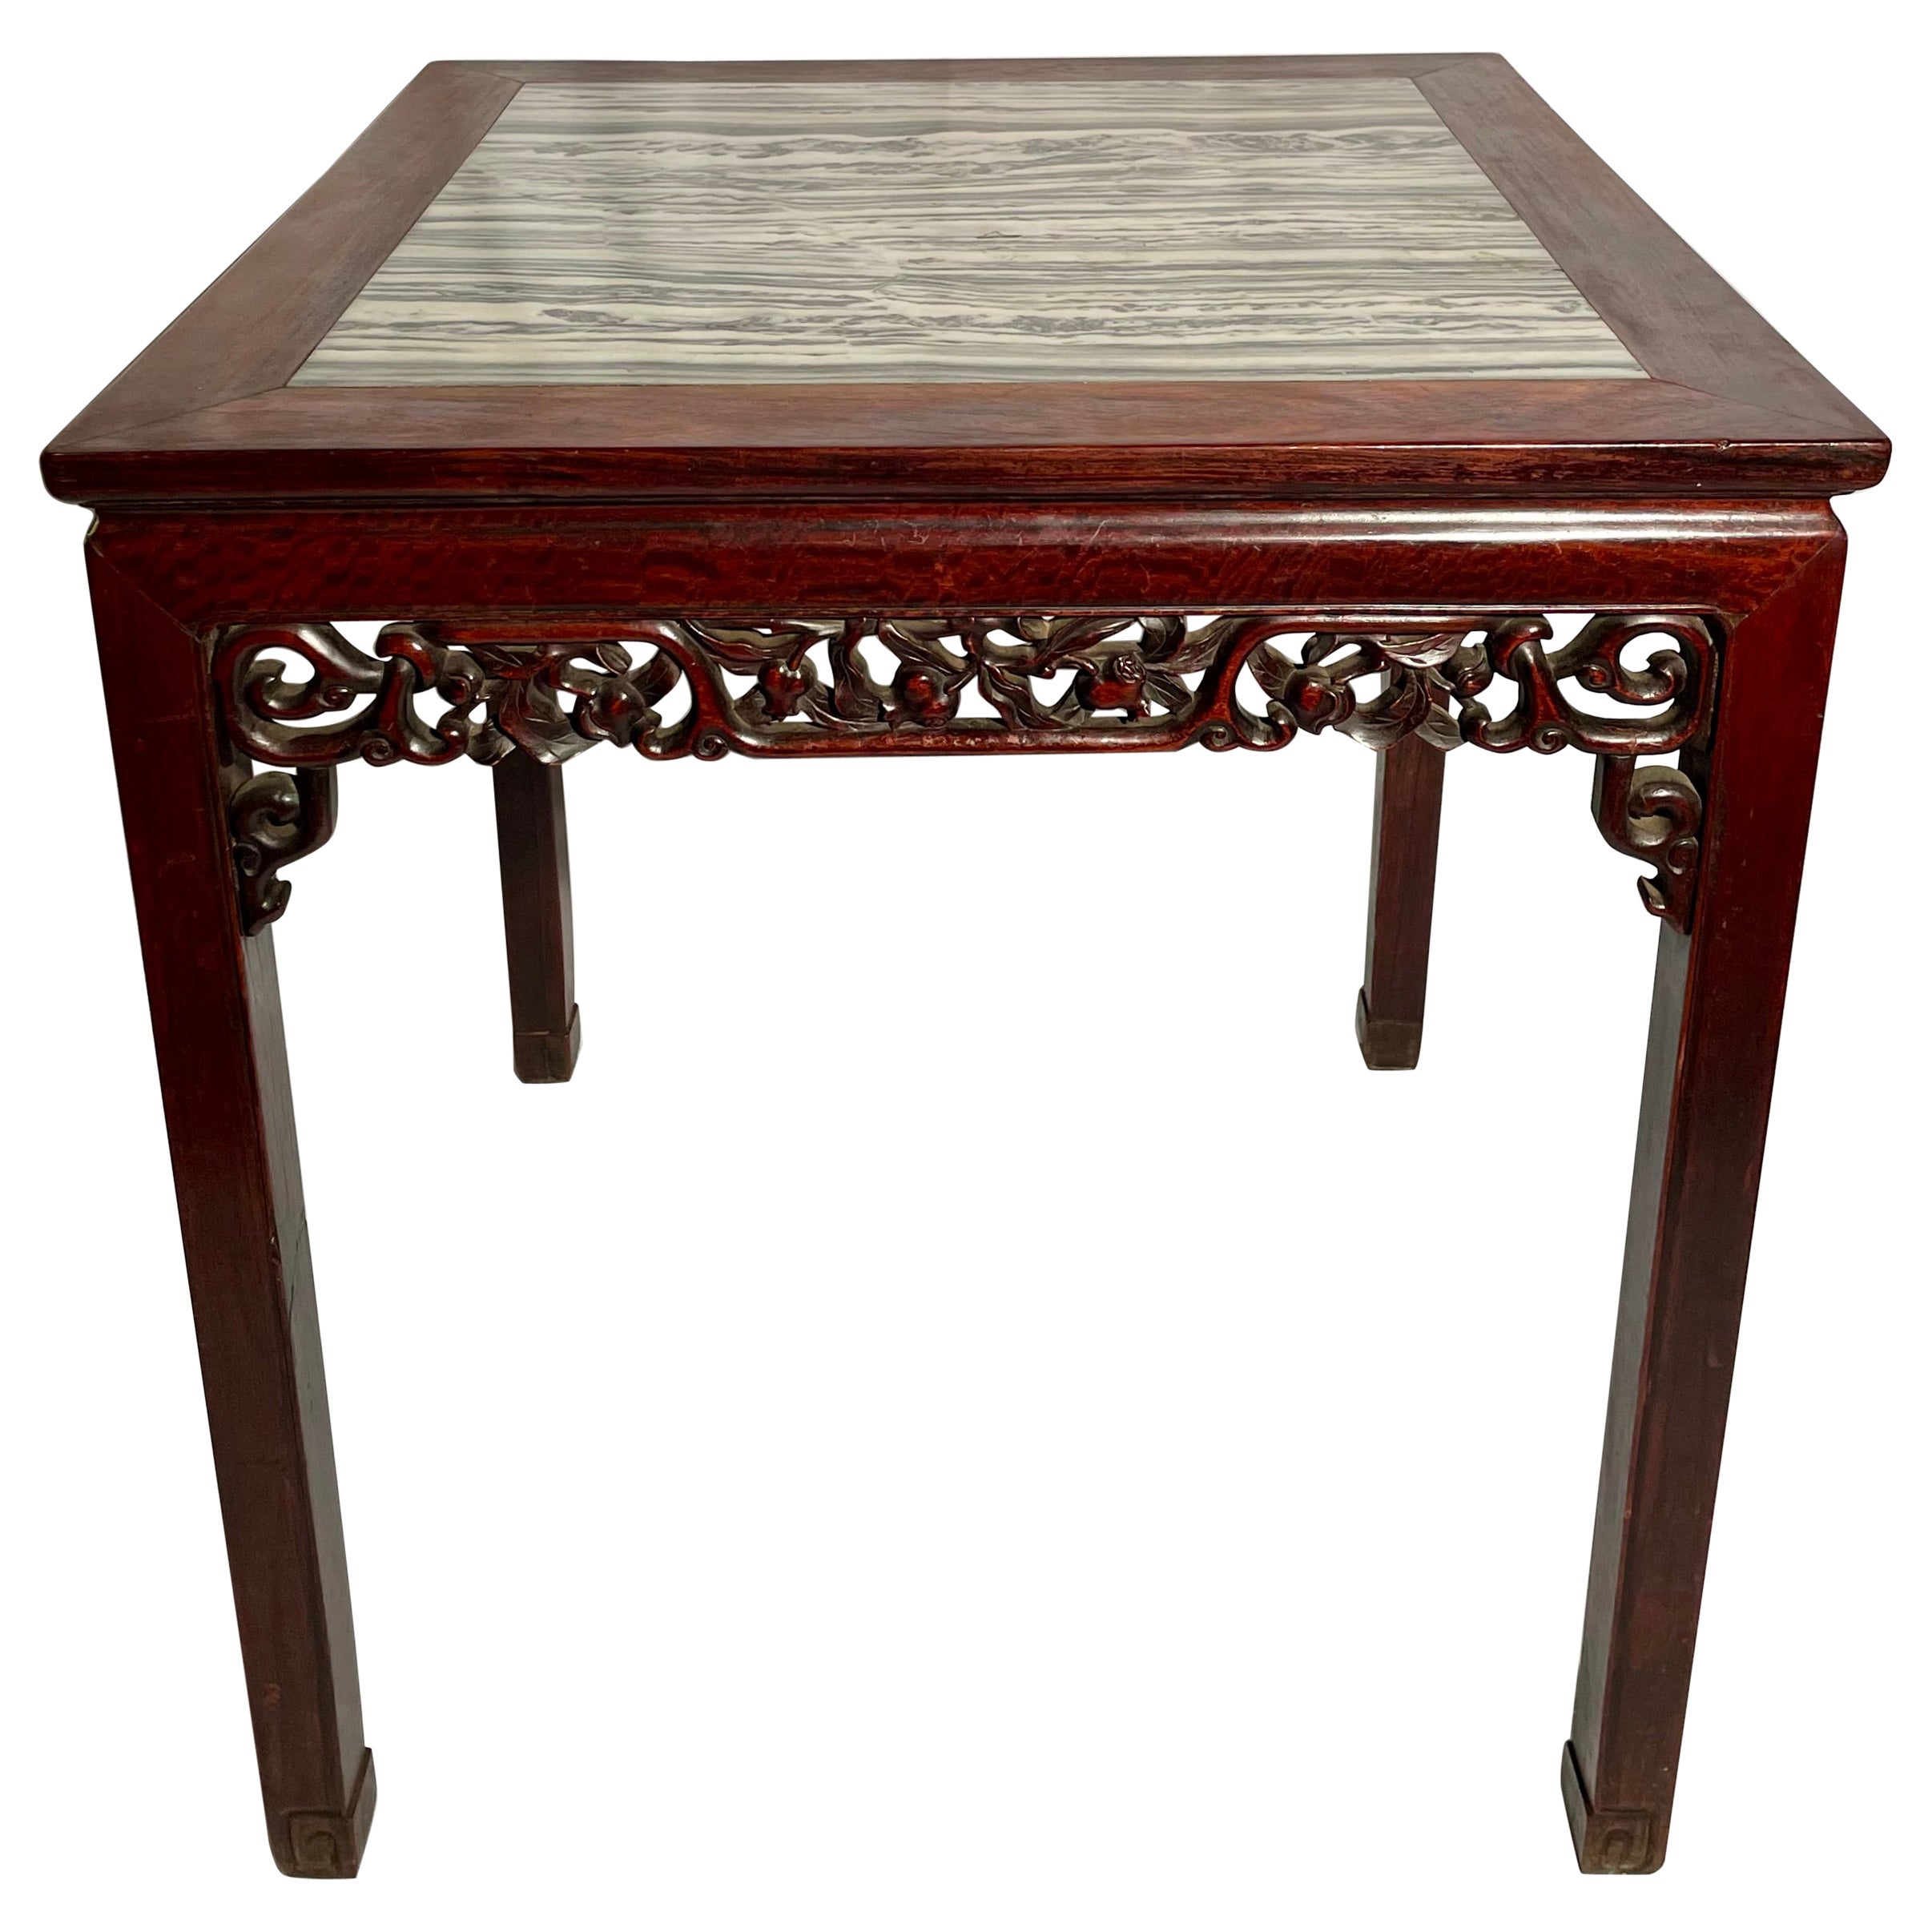 Antique Late 19th Century Chinese Marble-Top Teakwood Table, Circa 1890's. For Sale